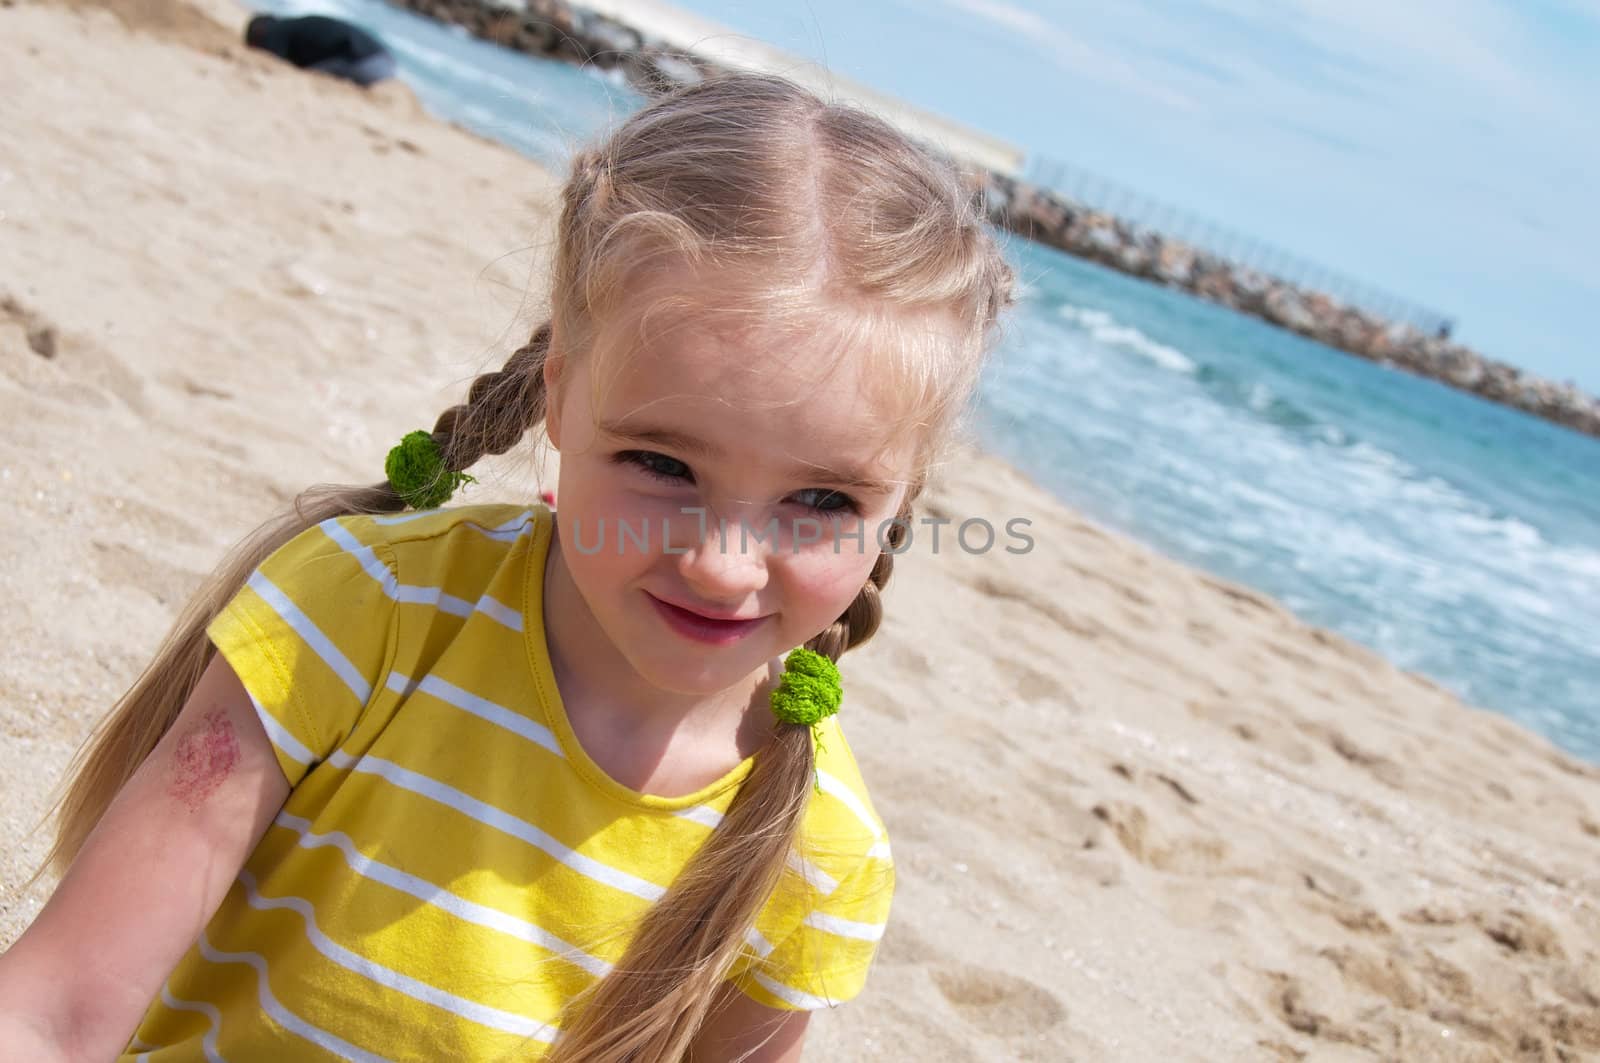 Little girl sitting on the beach by anytka